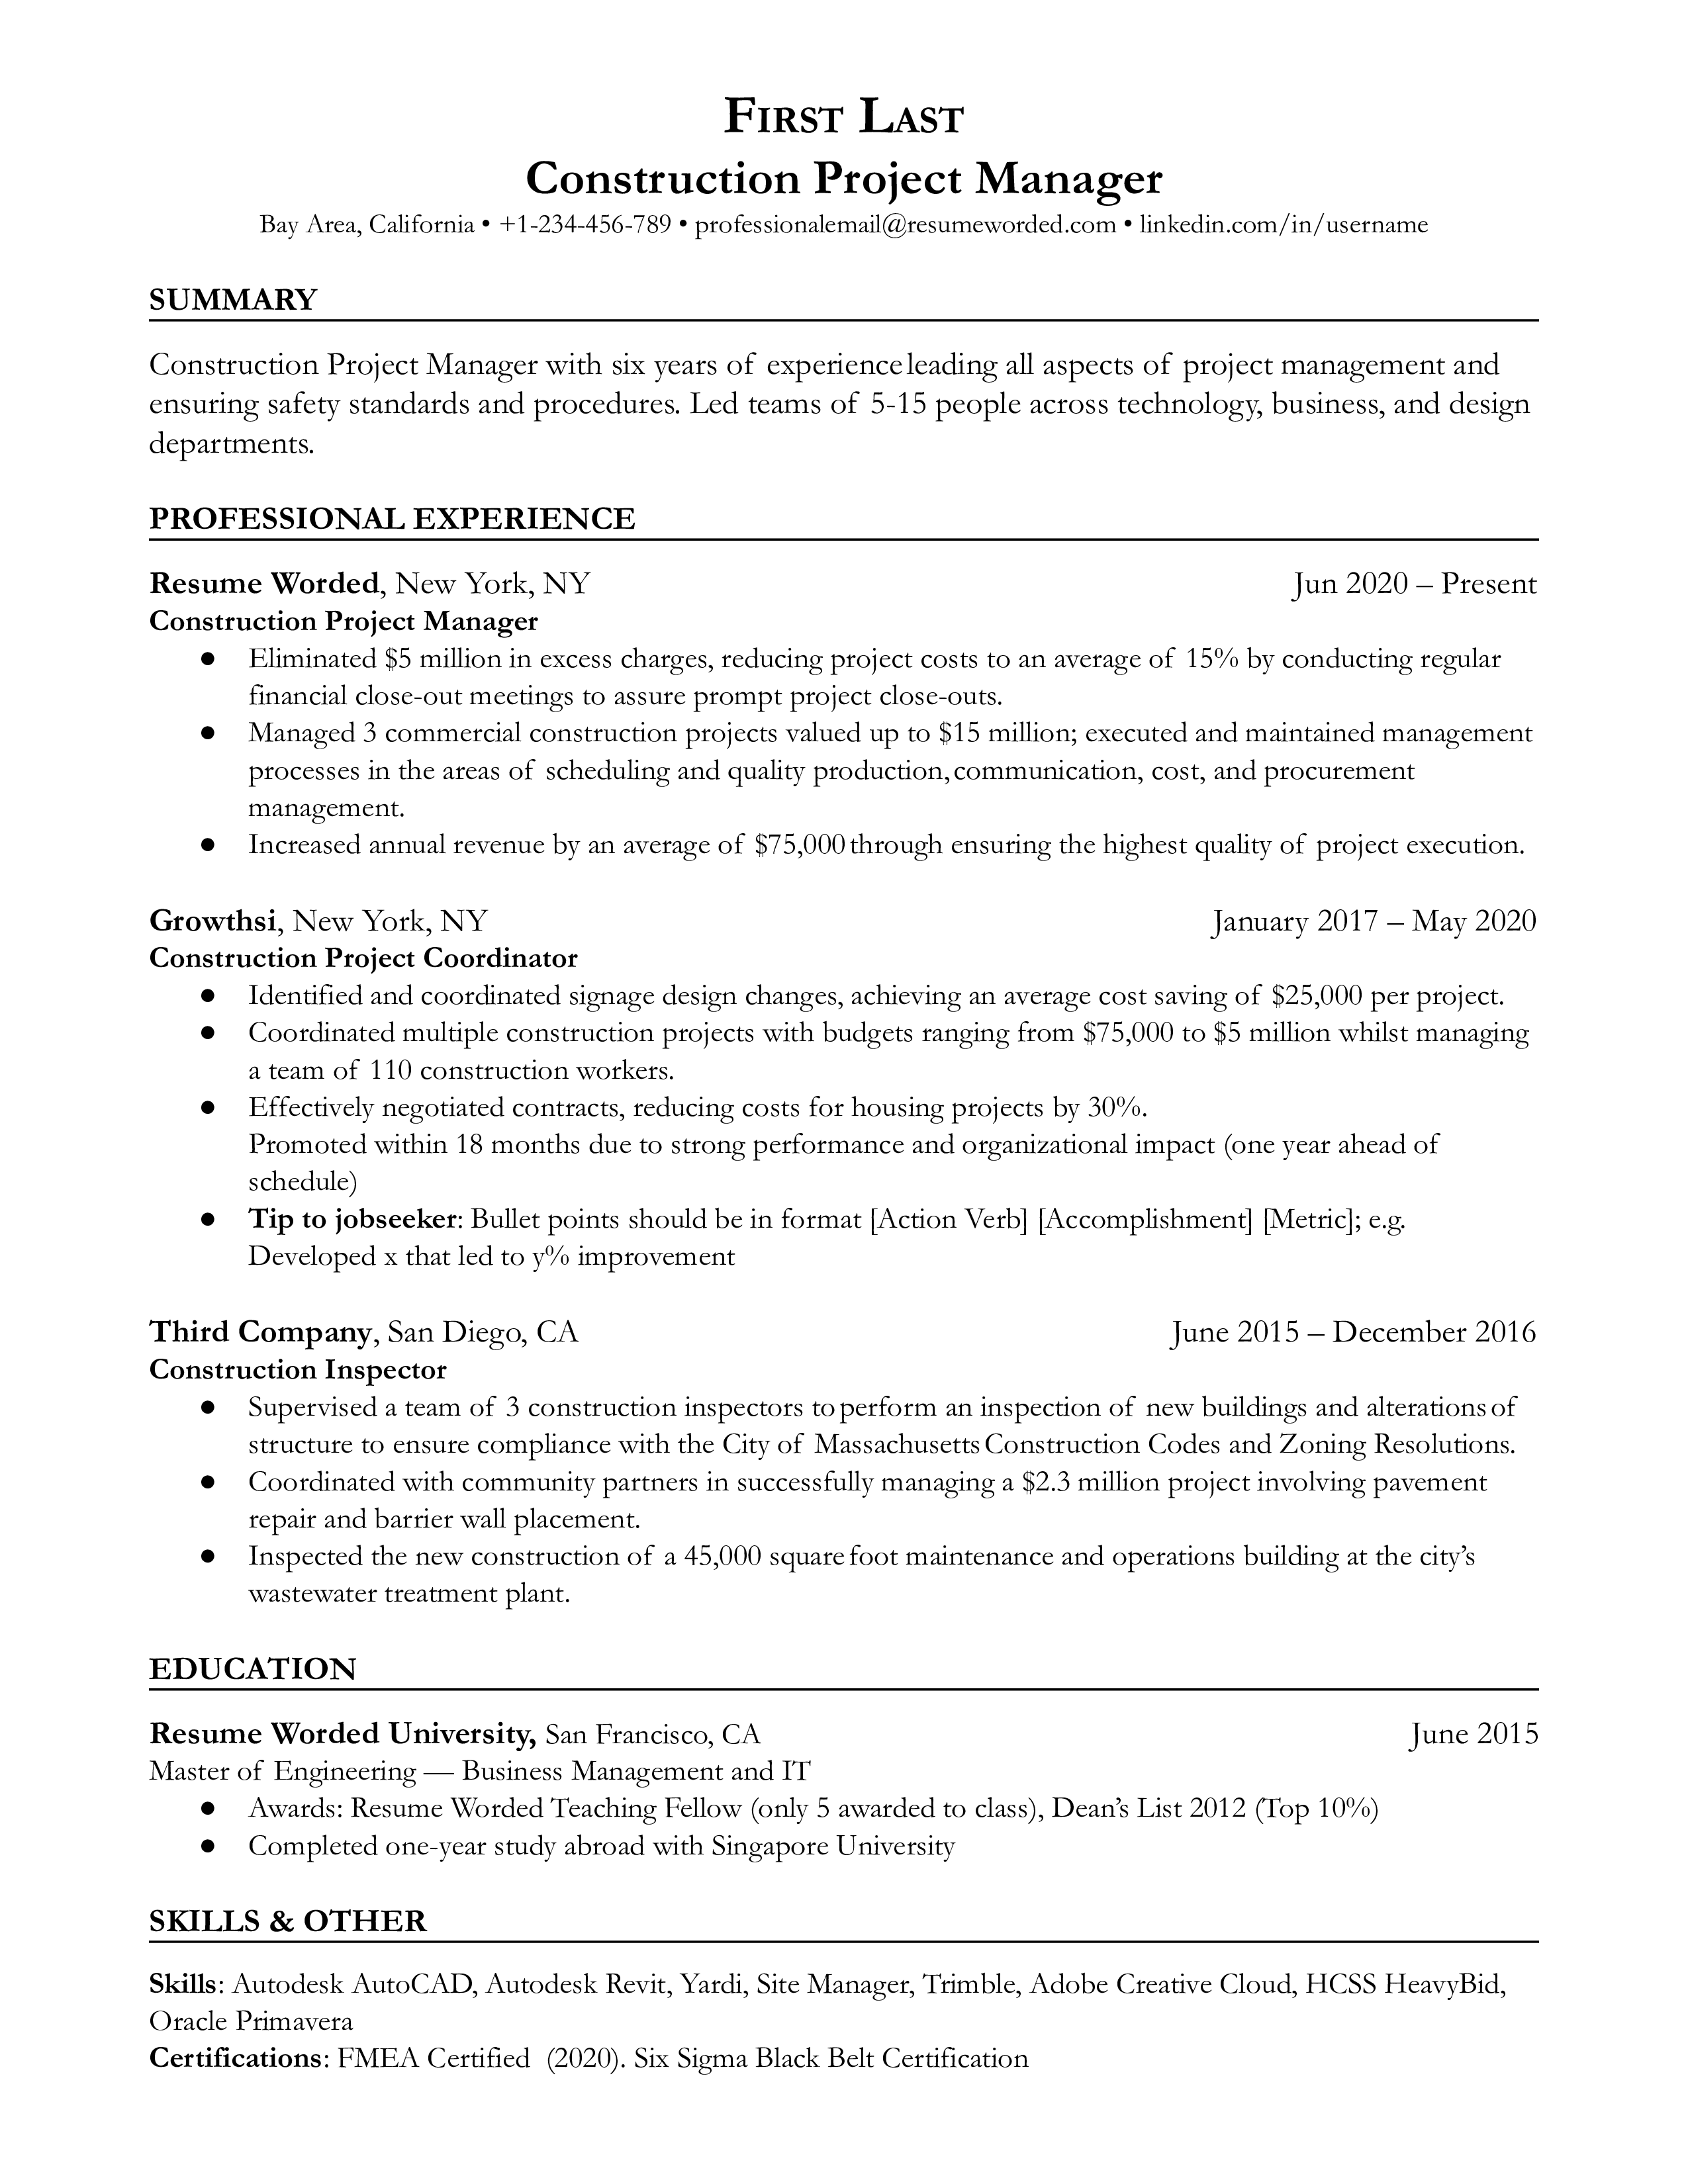 Construction Project Manager Resume Template + Example